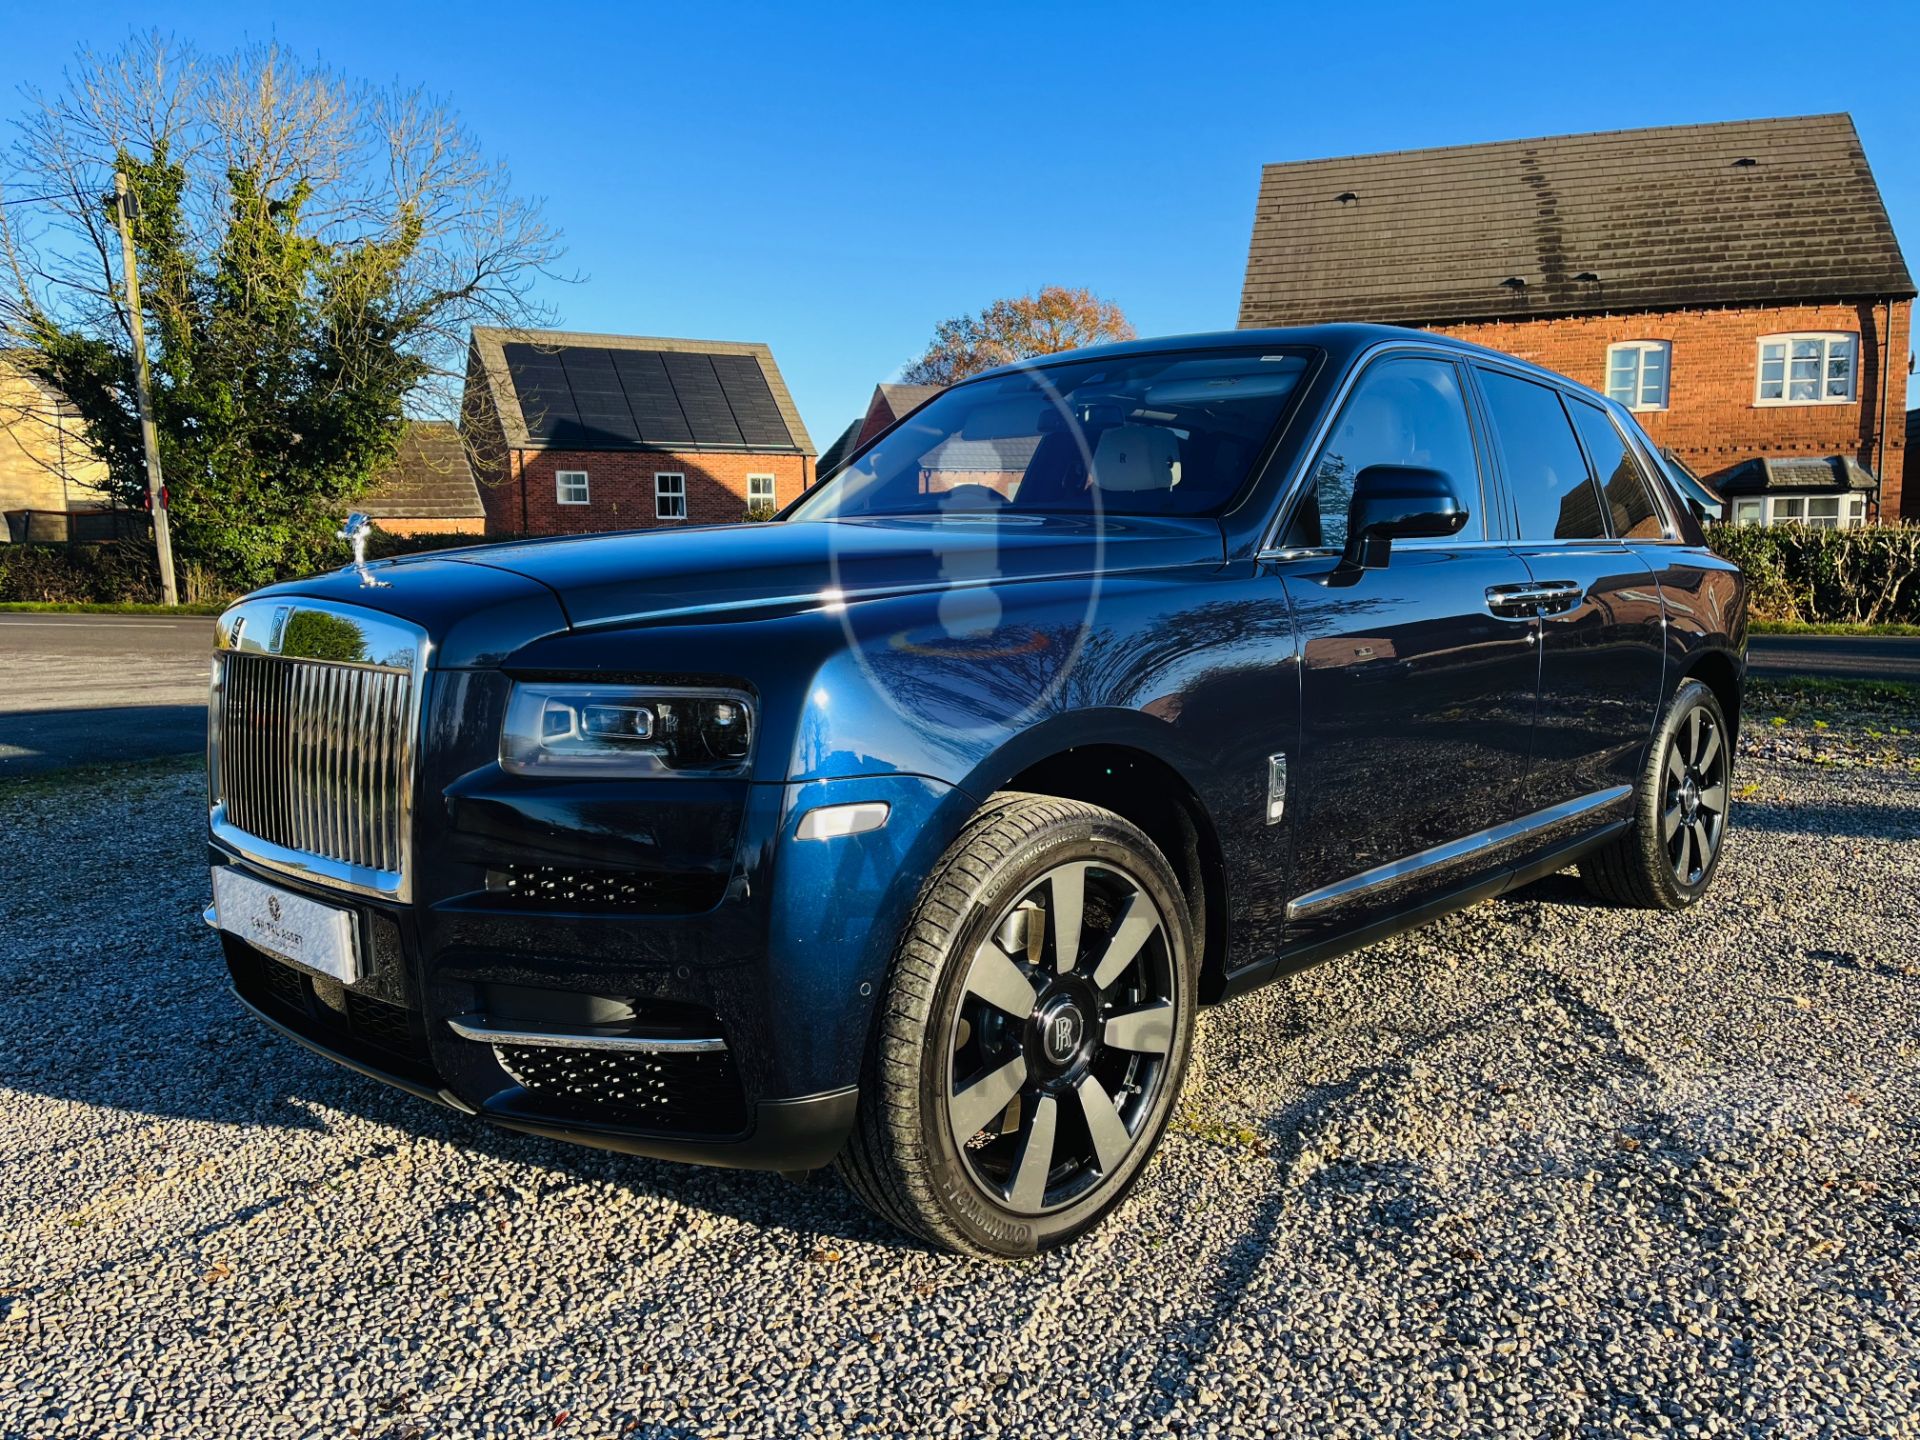 ROLLS ROYCE CULLINAN SILVER BADGE V12 6.75L (23 REG) ULTIMATE LUXURY SUV - ONLY 2100 MILES -MUST SEE - Image 3 of 61